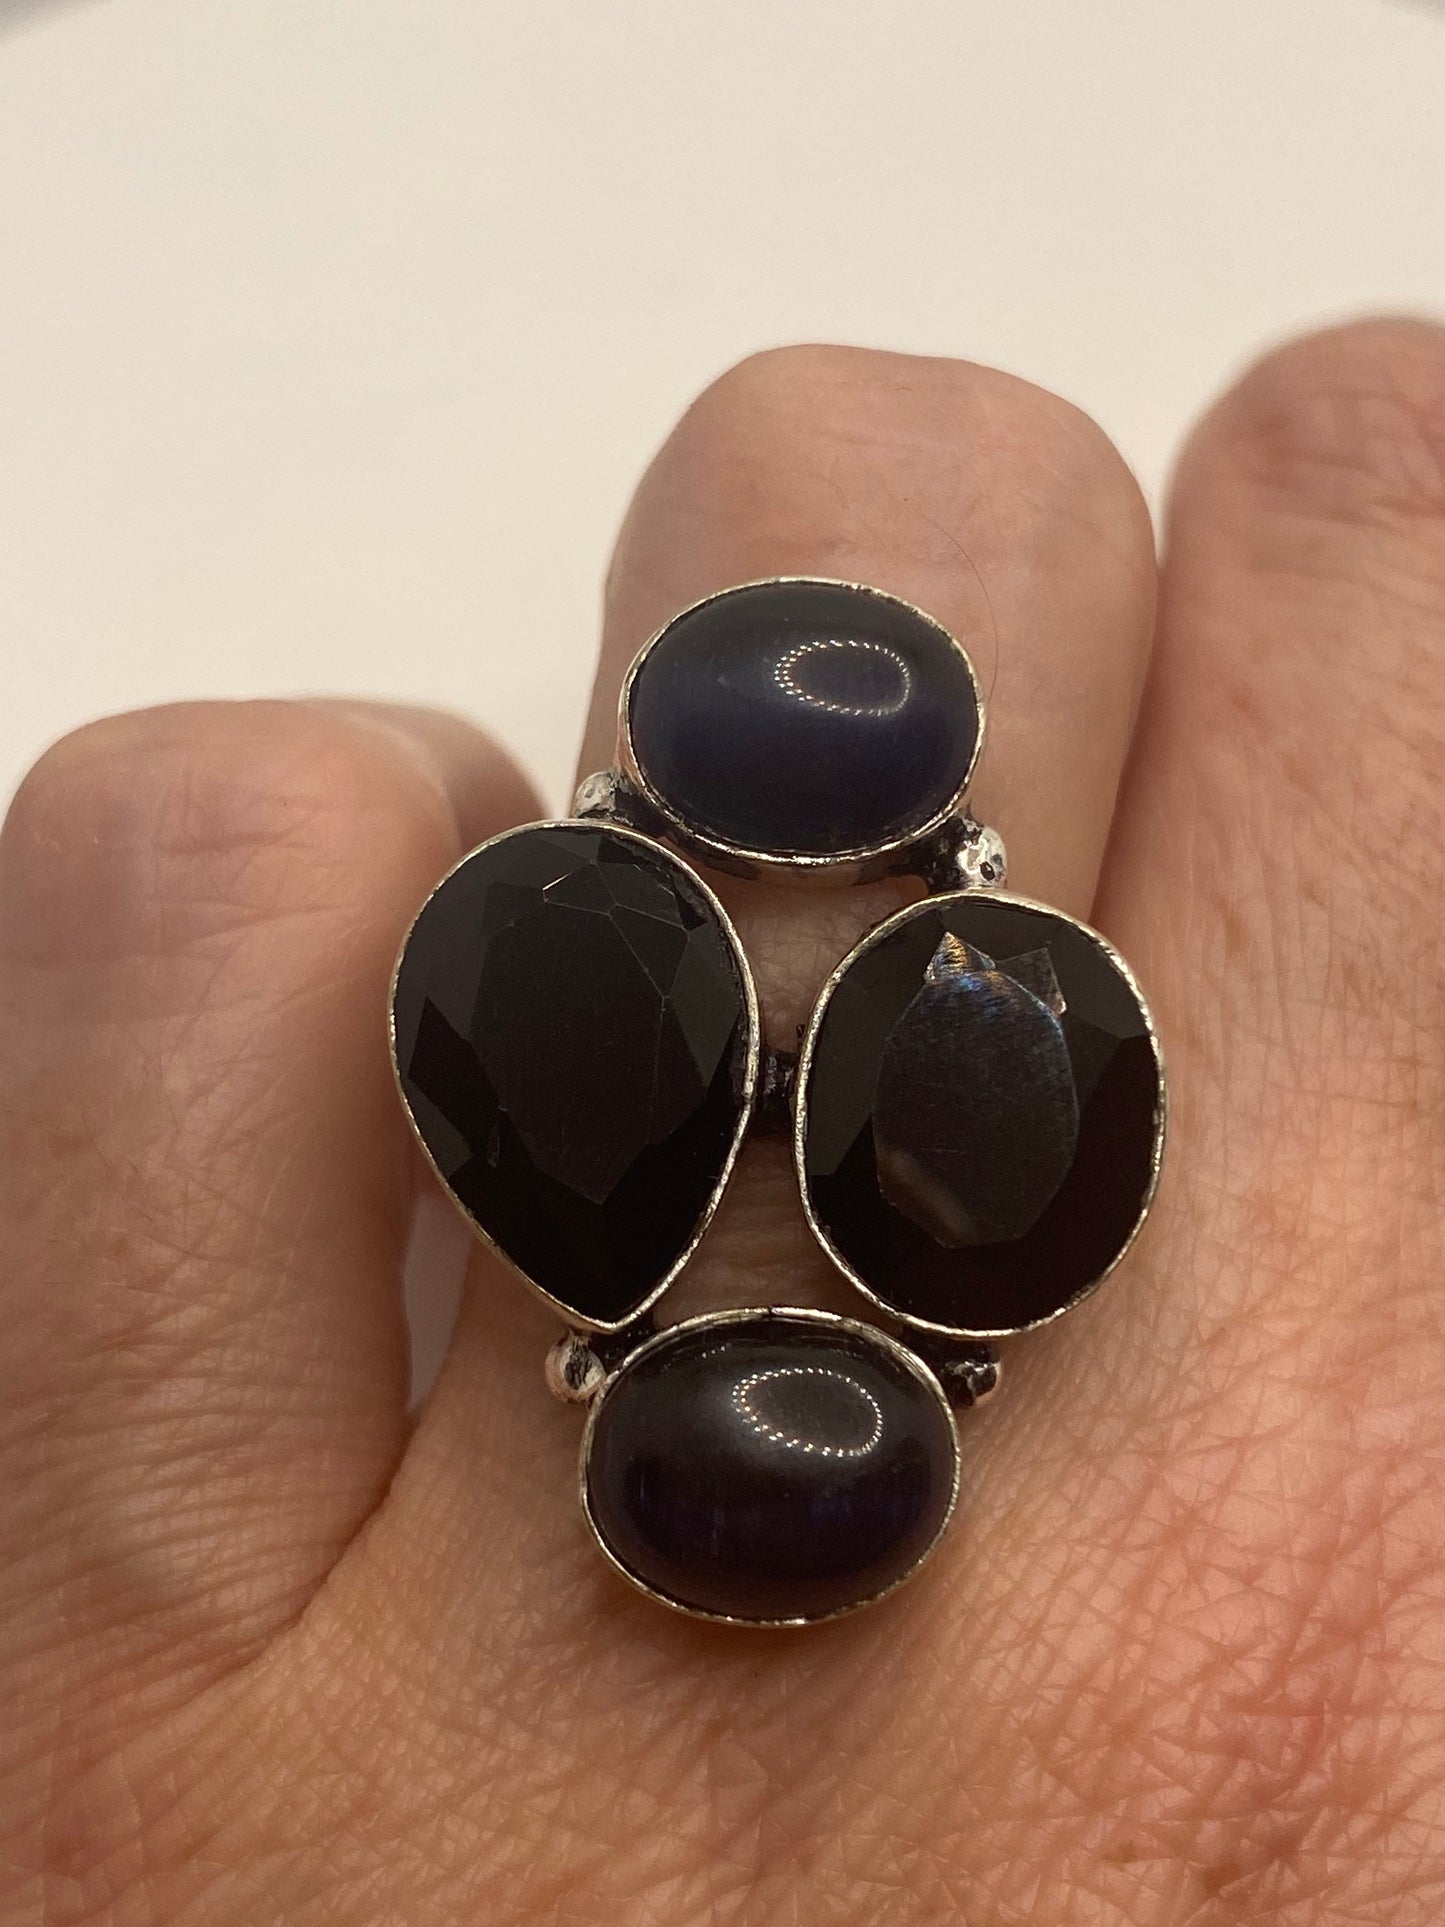 Vintage Faceted Black Onyx Cats Eye Silver Ring Size 6